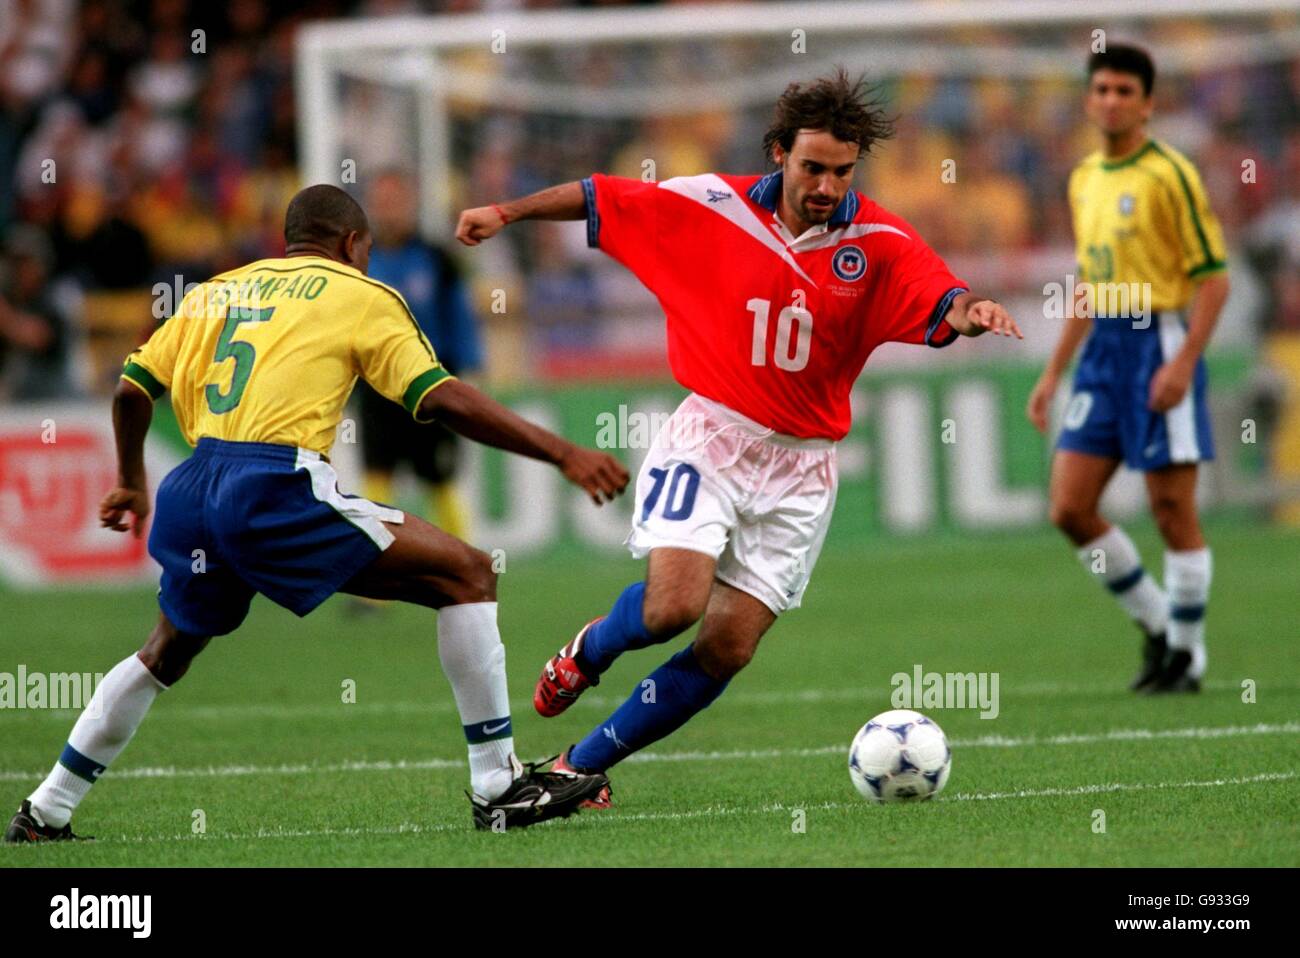 Soccer - World Cup France 98 - Second Round - Brazil v Chile. Chile's Jose Sierra (right) gets away from Brazil's Cesar Sampaio (left) Stock Photo